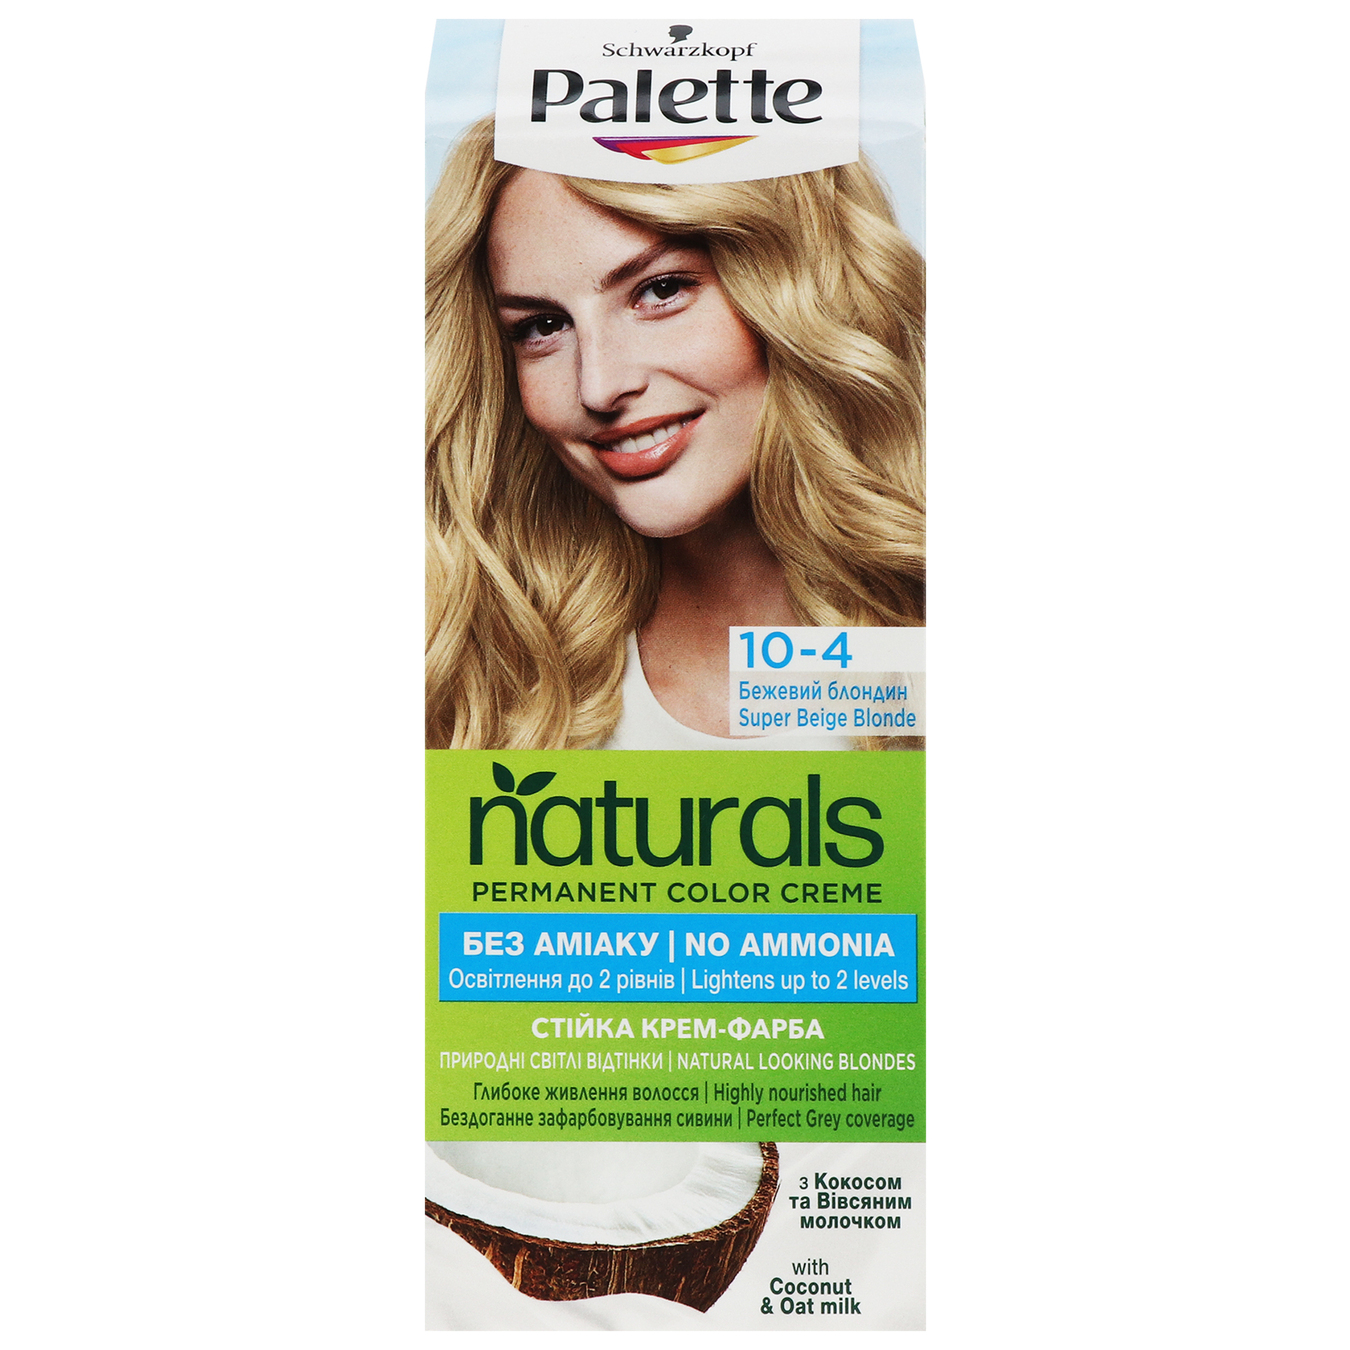 Cream-dye Palette Naturals 10-4 Beige blond without ammonia permanent hair color 110ml